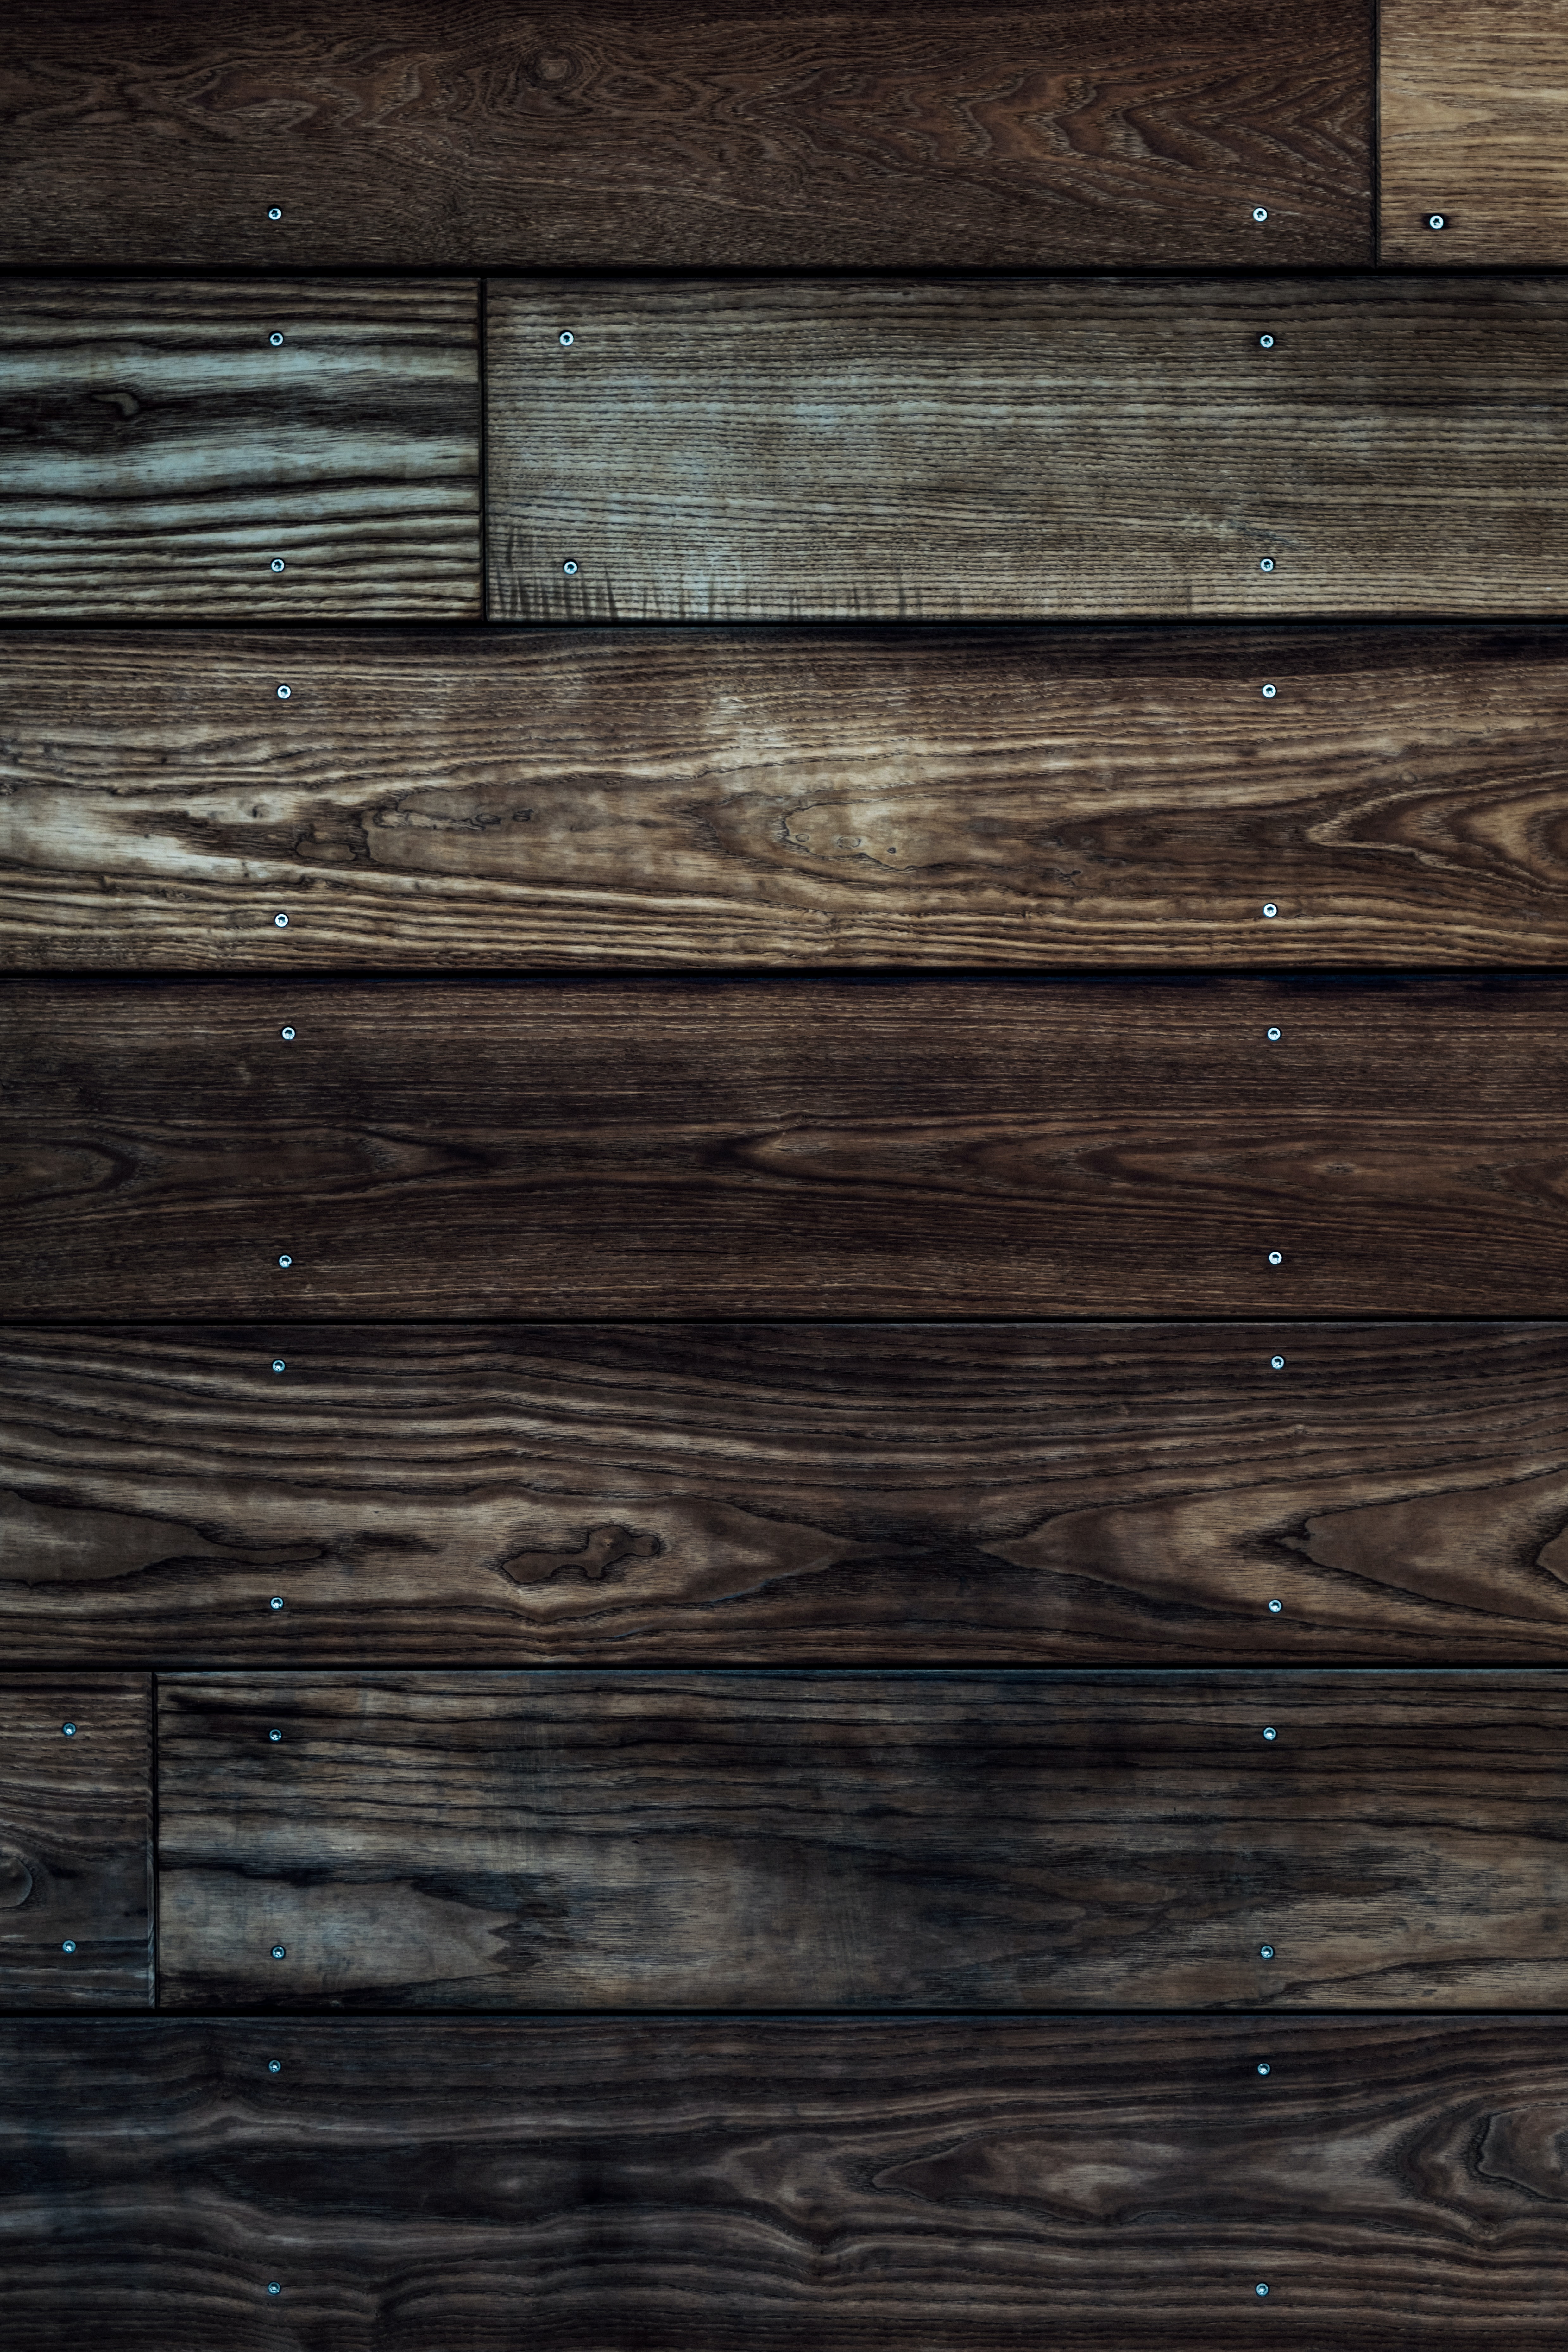 Wallpaper Full HD surface, wood, wooden, texture, textures, planks, board